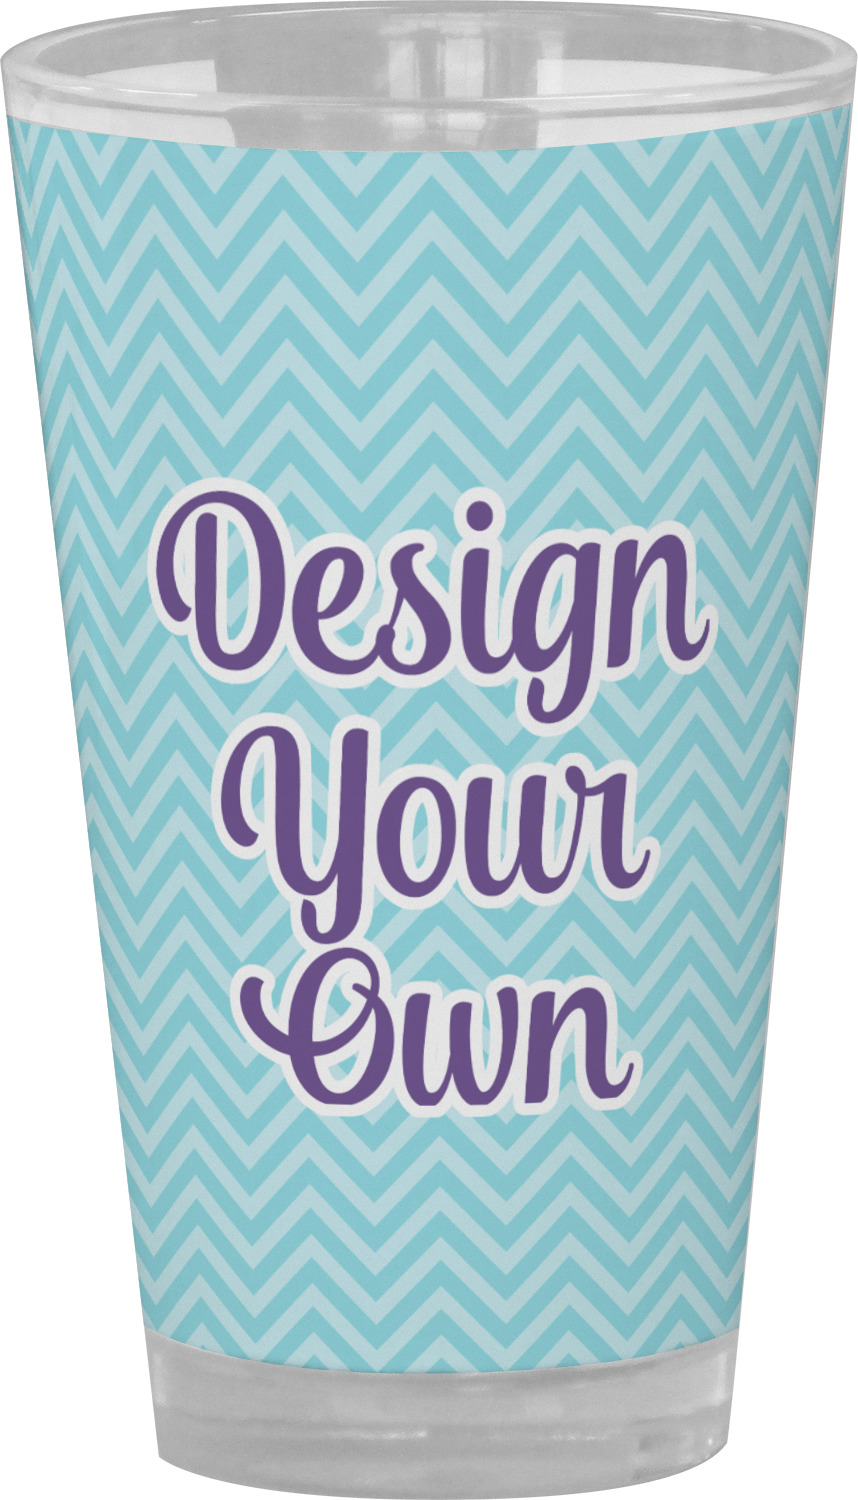 https://www.youcustomizeit.com/common/MAKE/965833/Design-Your-Own-Drinking-Glass-Front.jpg?lm=1666800710